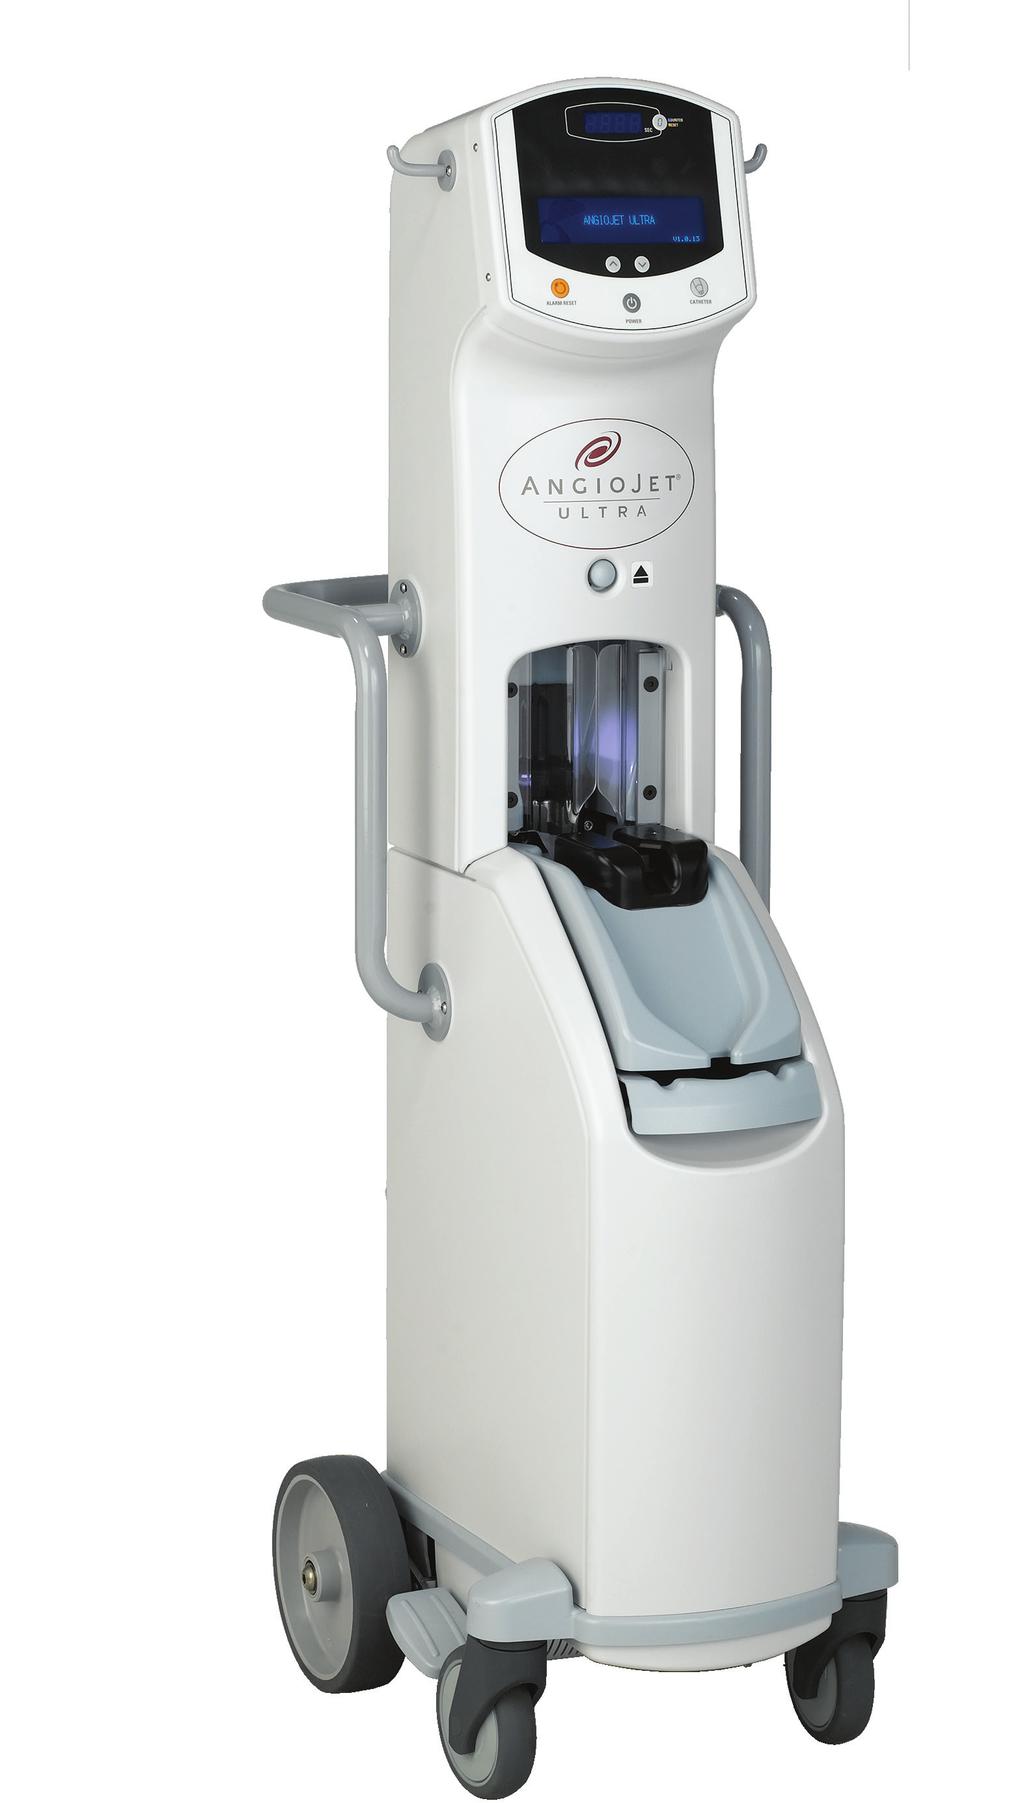 When you need the versatility and power to restore flow Refined from experience in over 700,000 cases worldwide, today s AngioJet System offers the reliable and predictable performance needed to